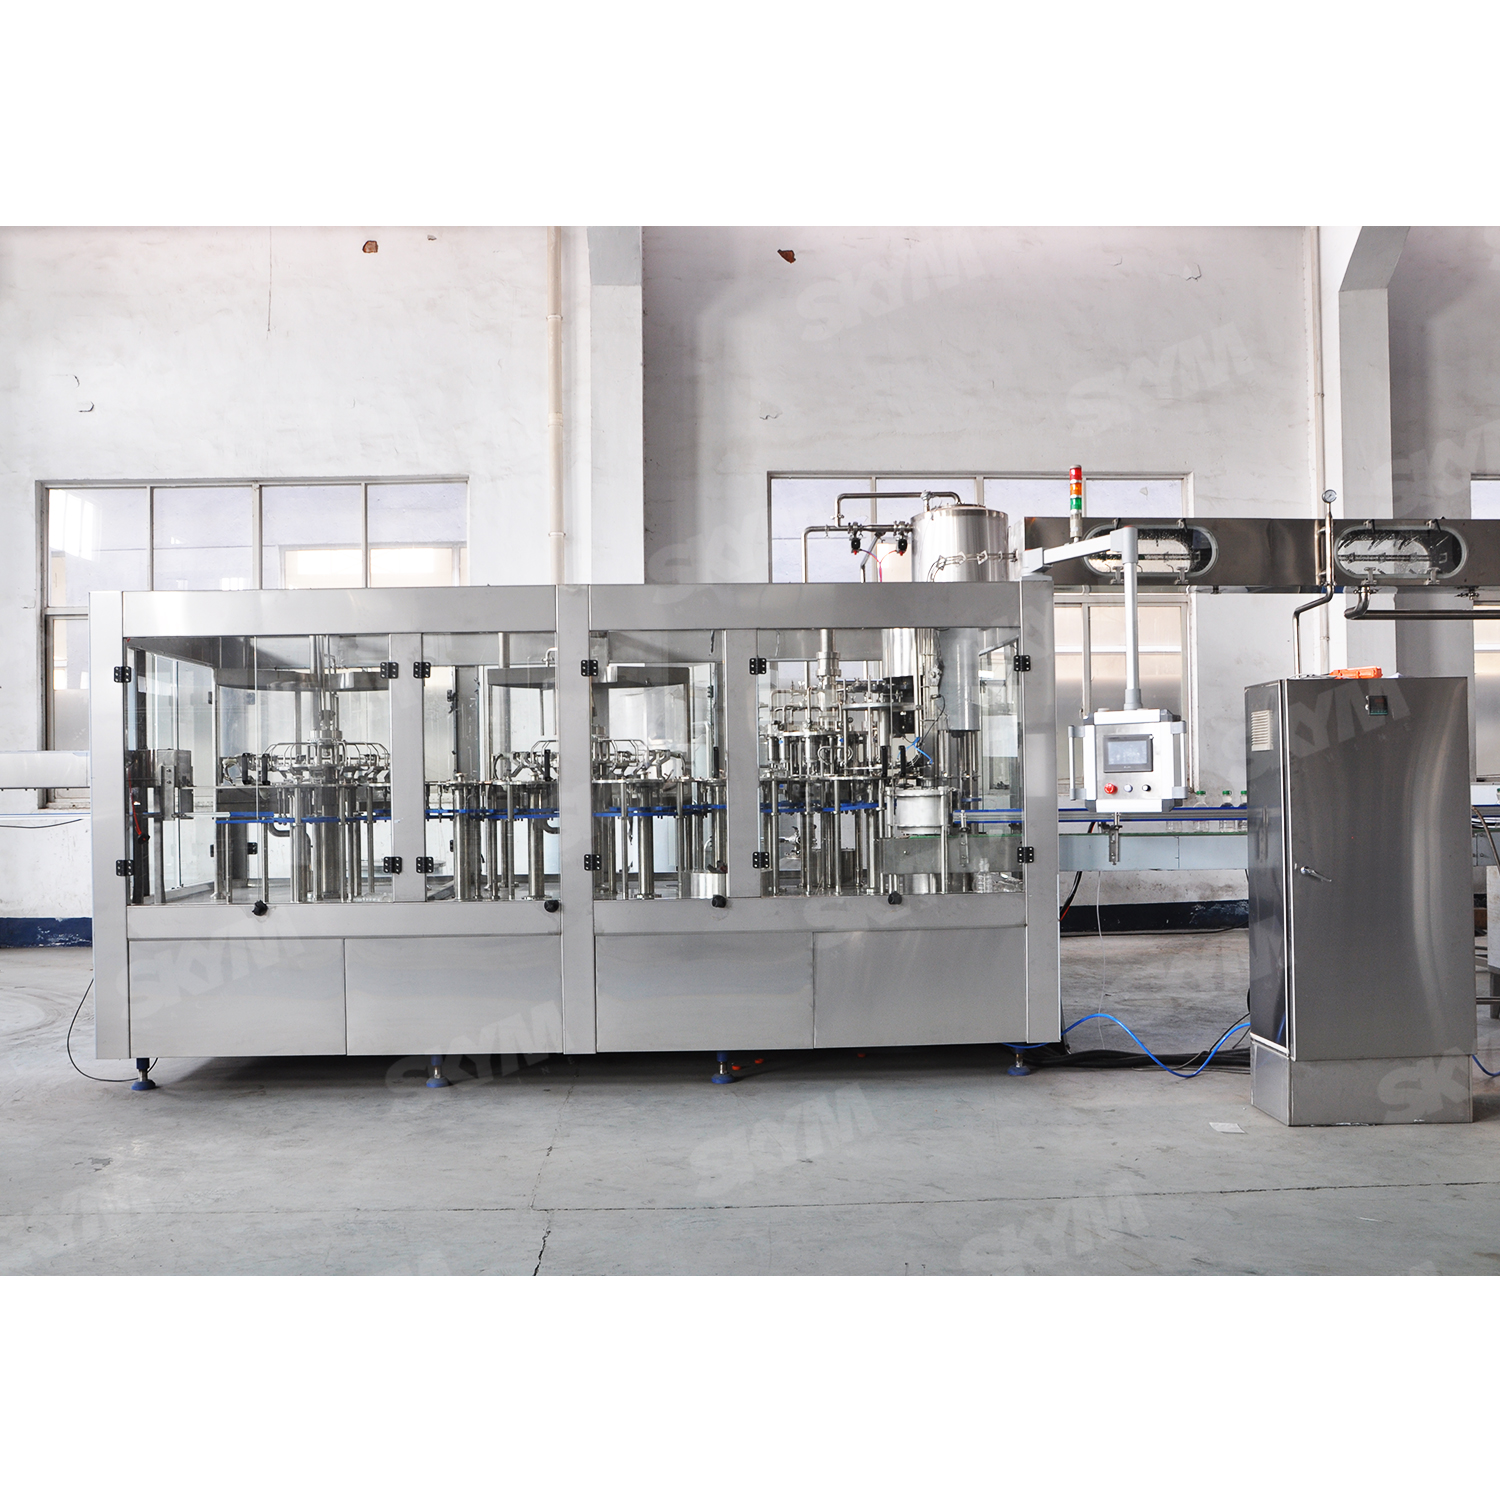 8000BPH Fruit Juice Industrial Filling And Packaging Machine